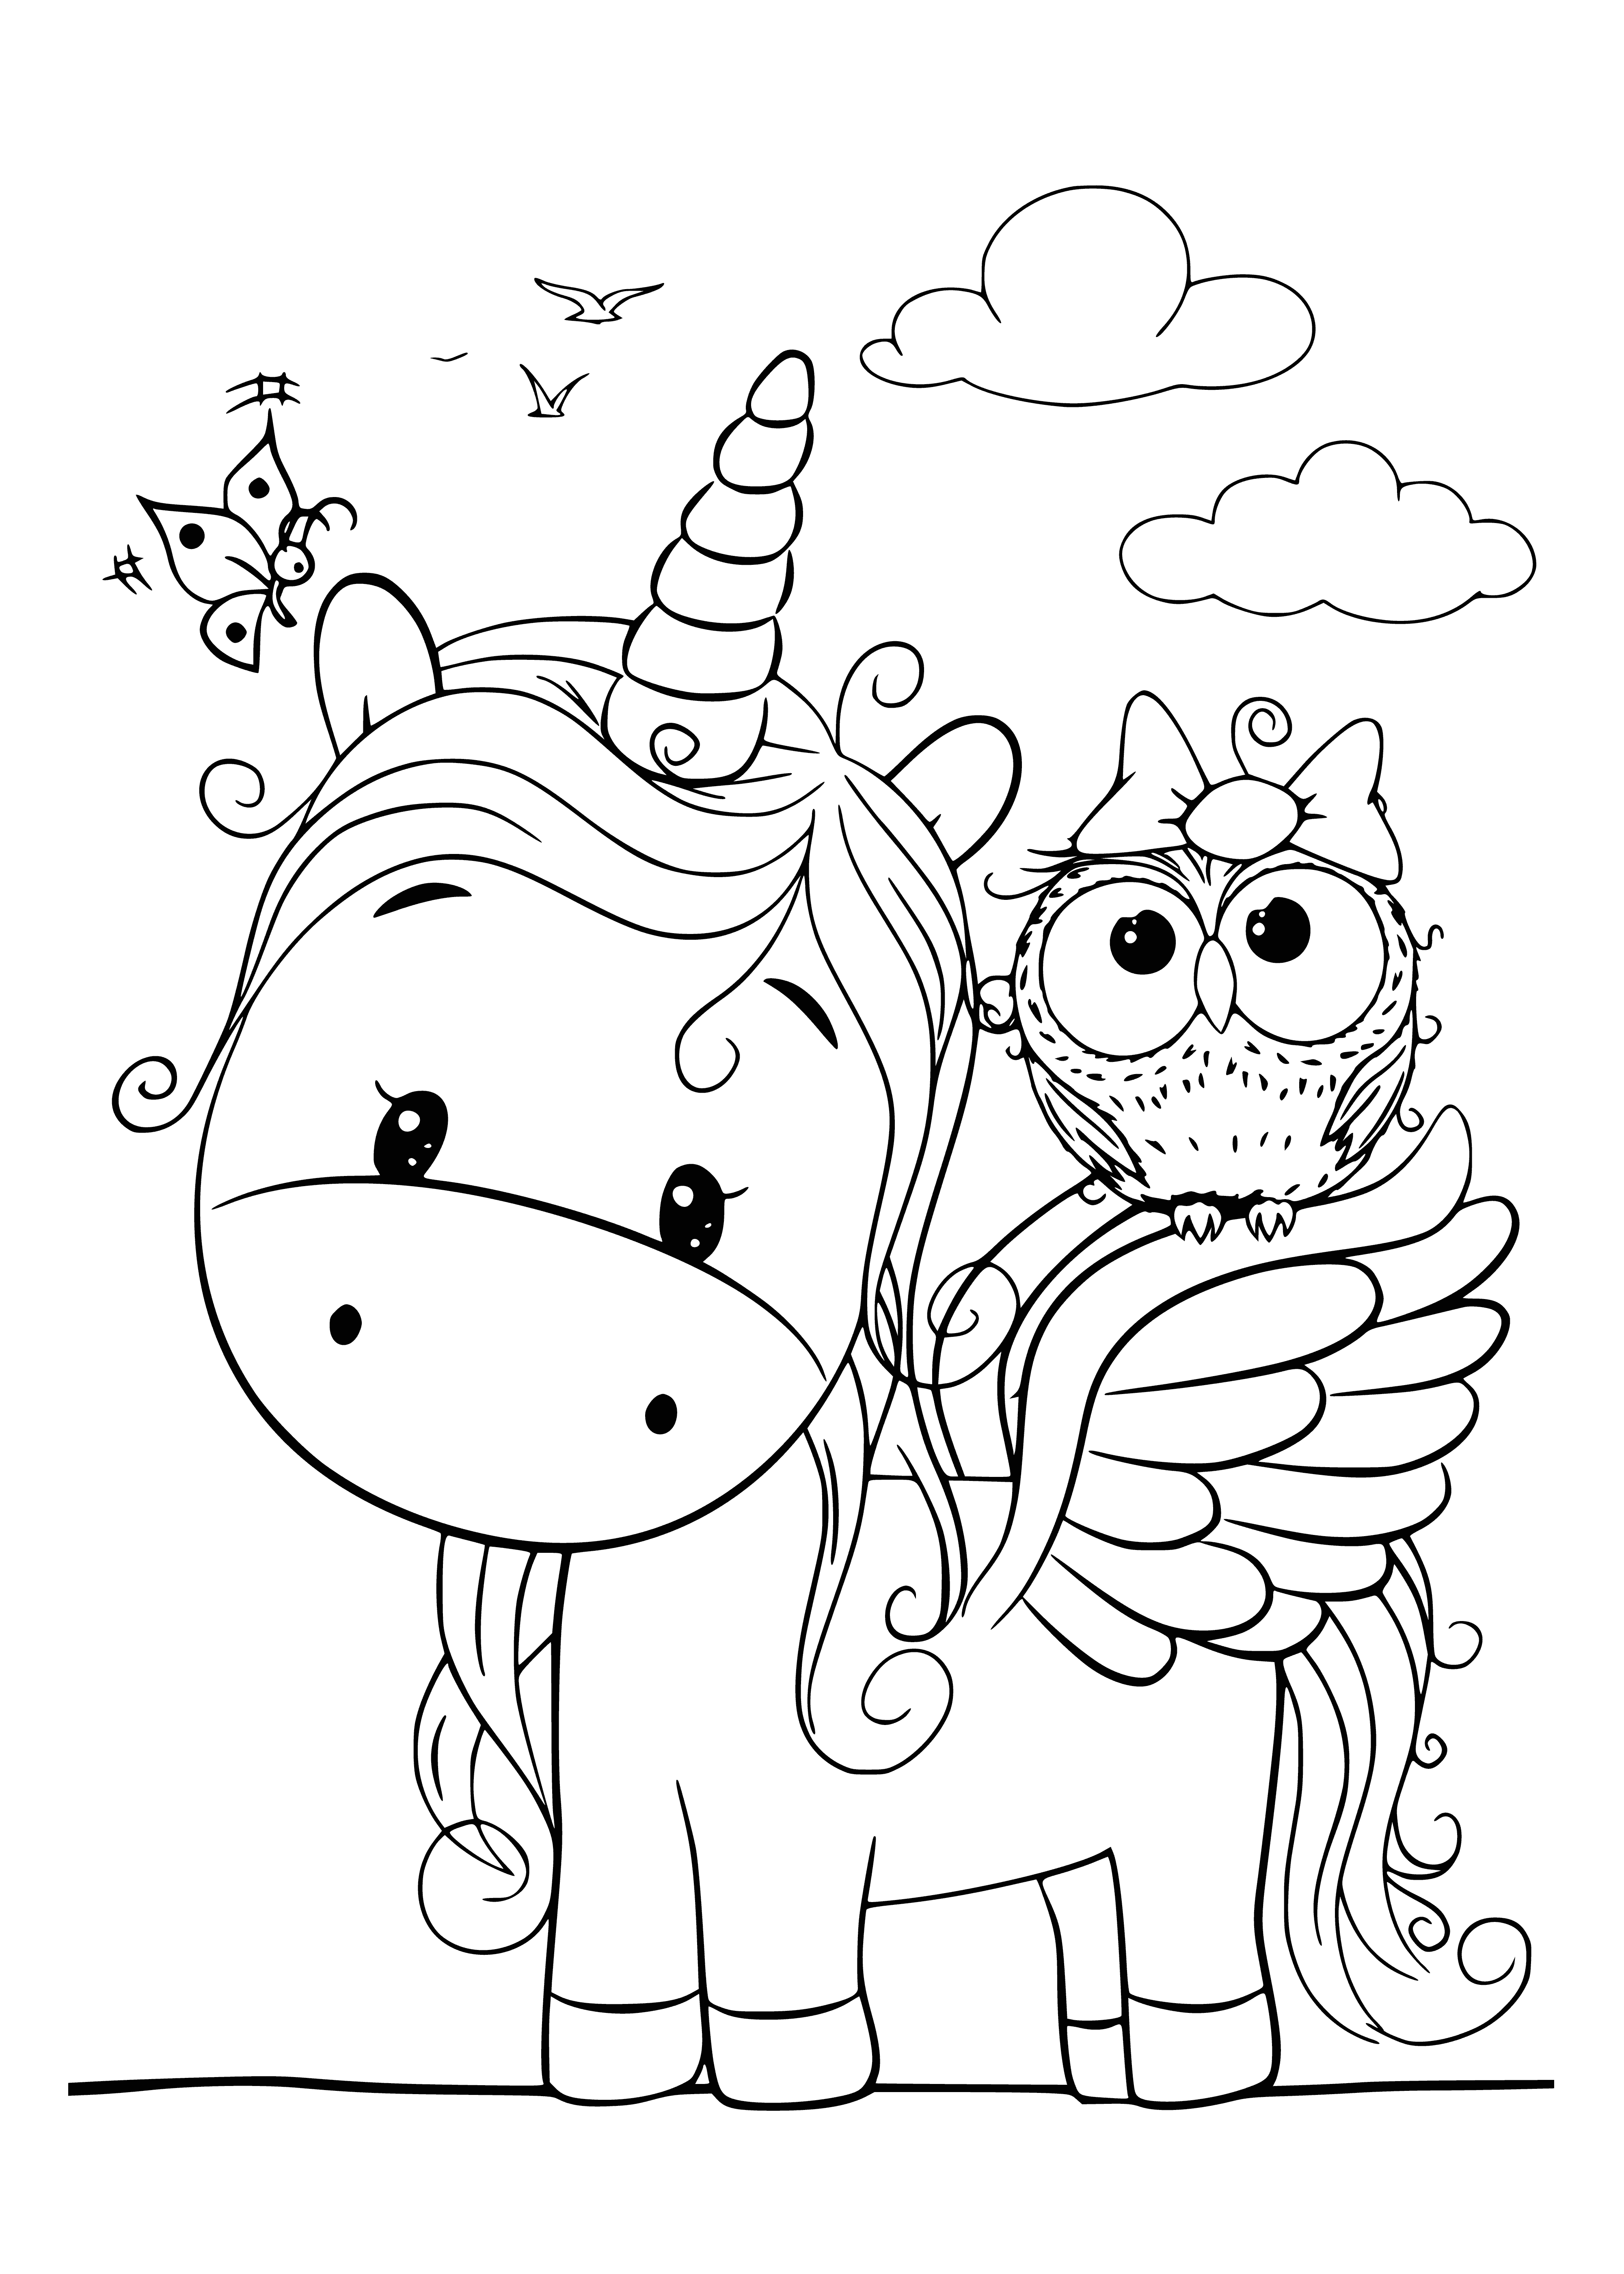 coloring page: Two kawaii friends in a lovely background of flowers & trees. Girl in a pink dress & white headband, boy in a blue shirt & red pants.